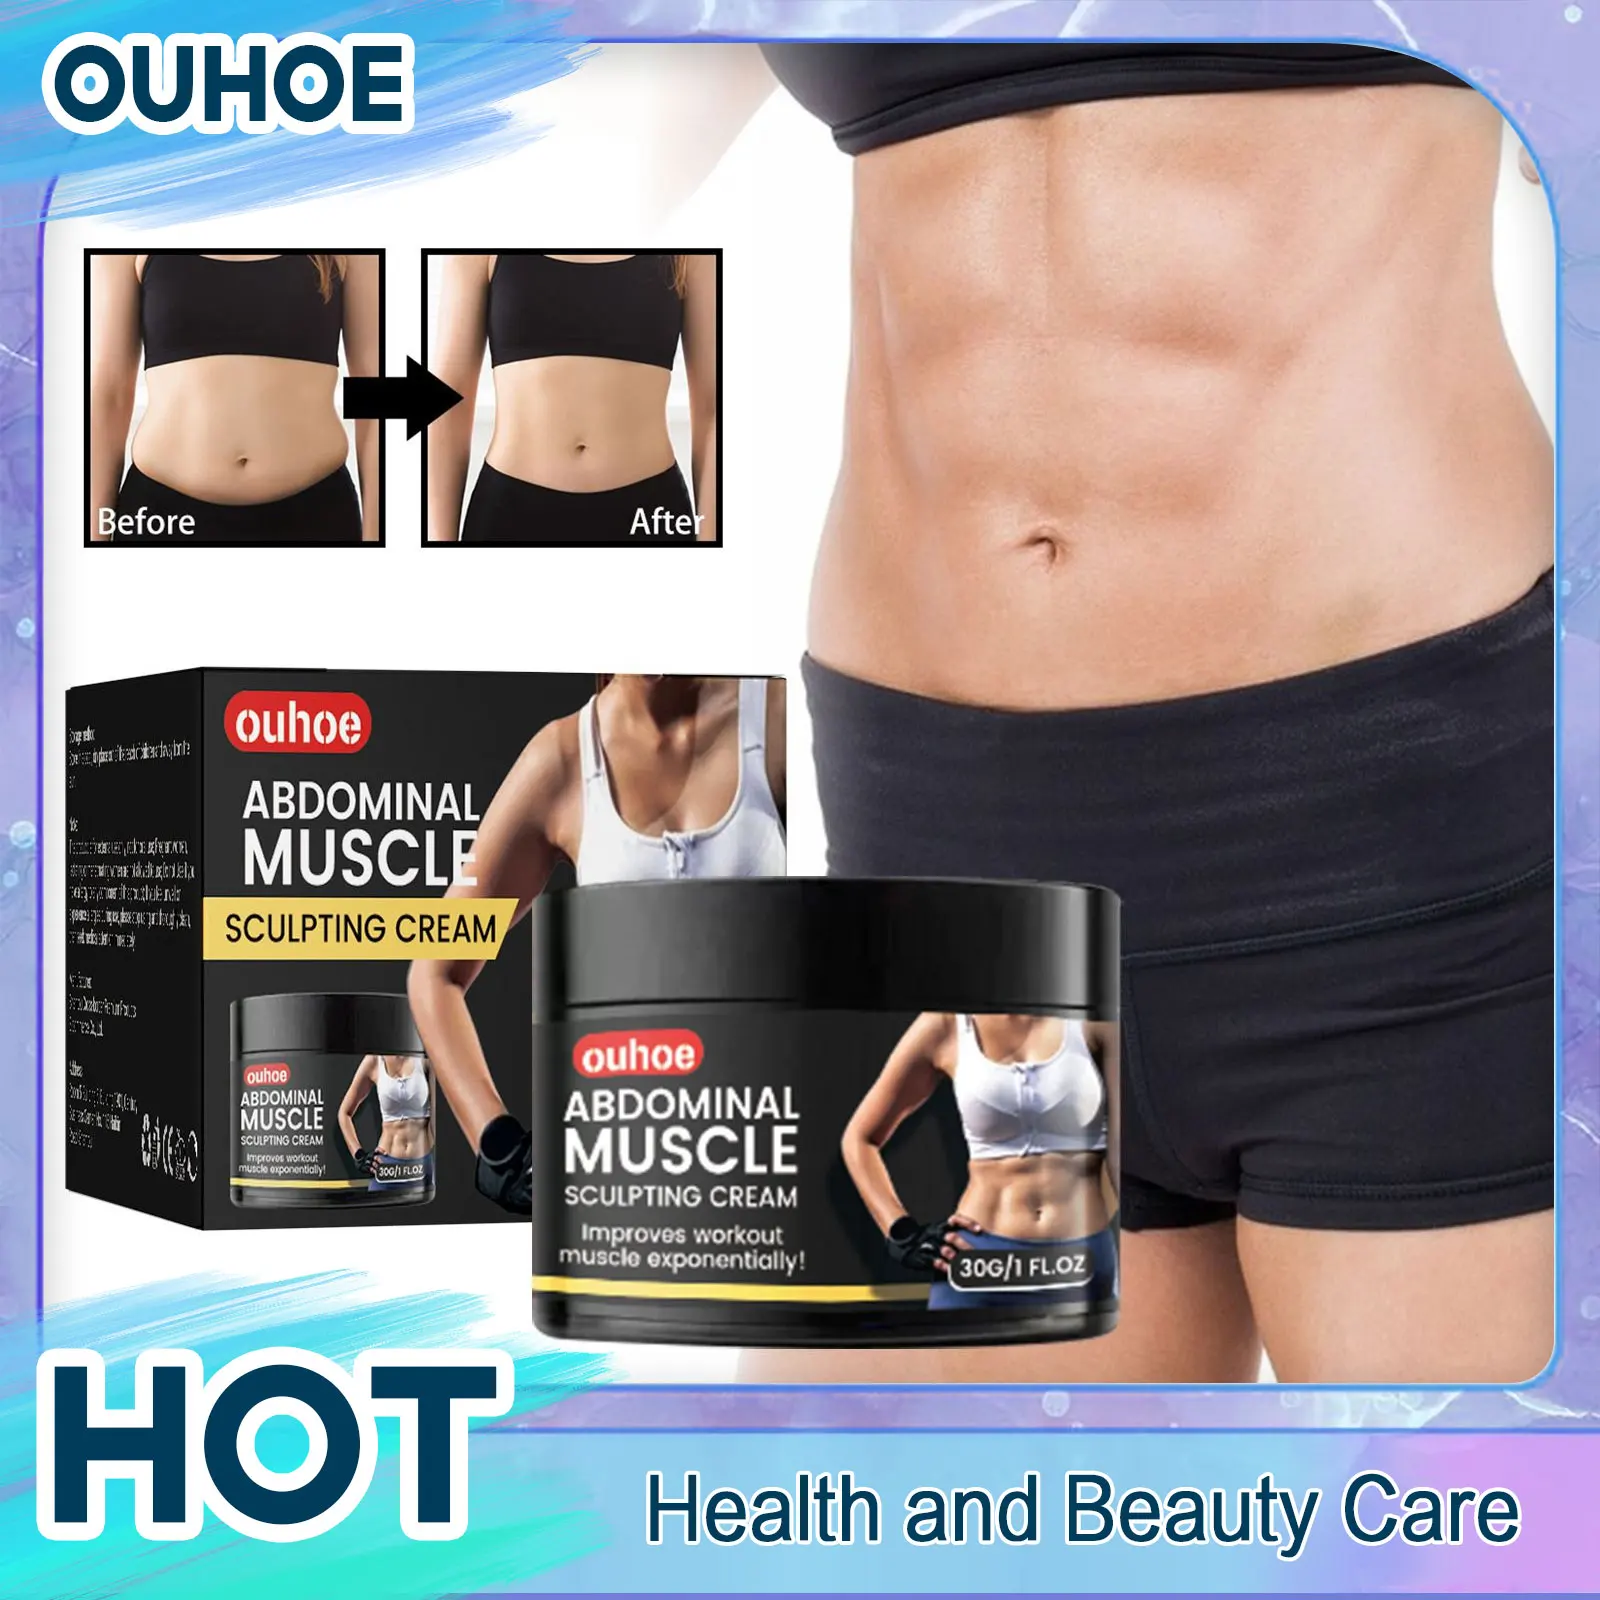 Belly Fat Burner Cream Weight Loss Firming Shaping Waist Lines Fitness Abdominal Muscle Flat Tummy Anti Cellulite Slimming Cream slimming shaper clothes sweat vest fat burner body belt waist body building tummy tank top for man weight loss